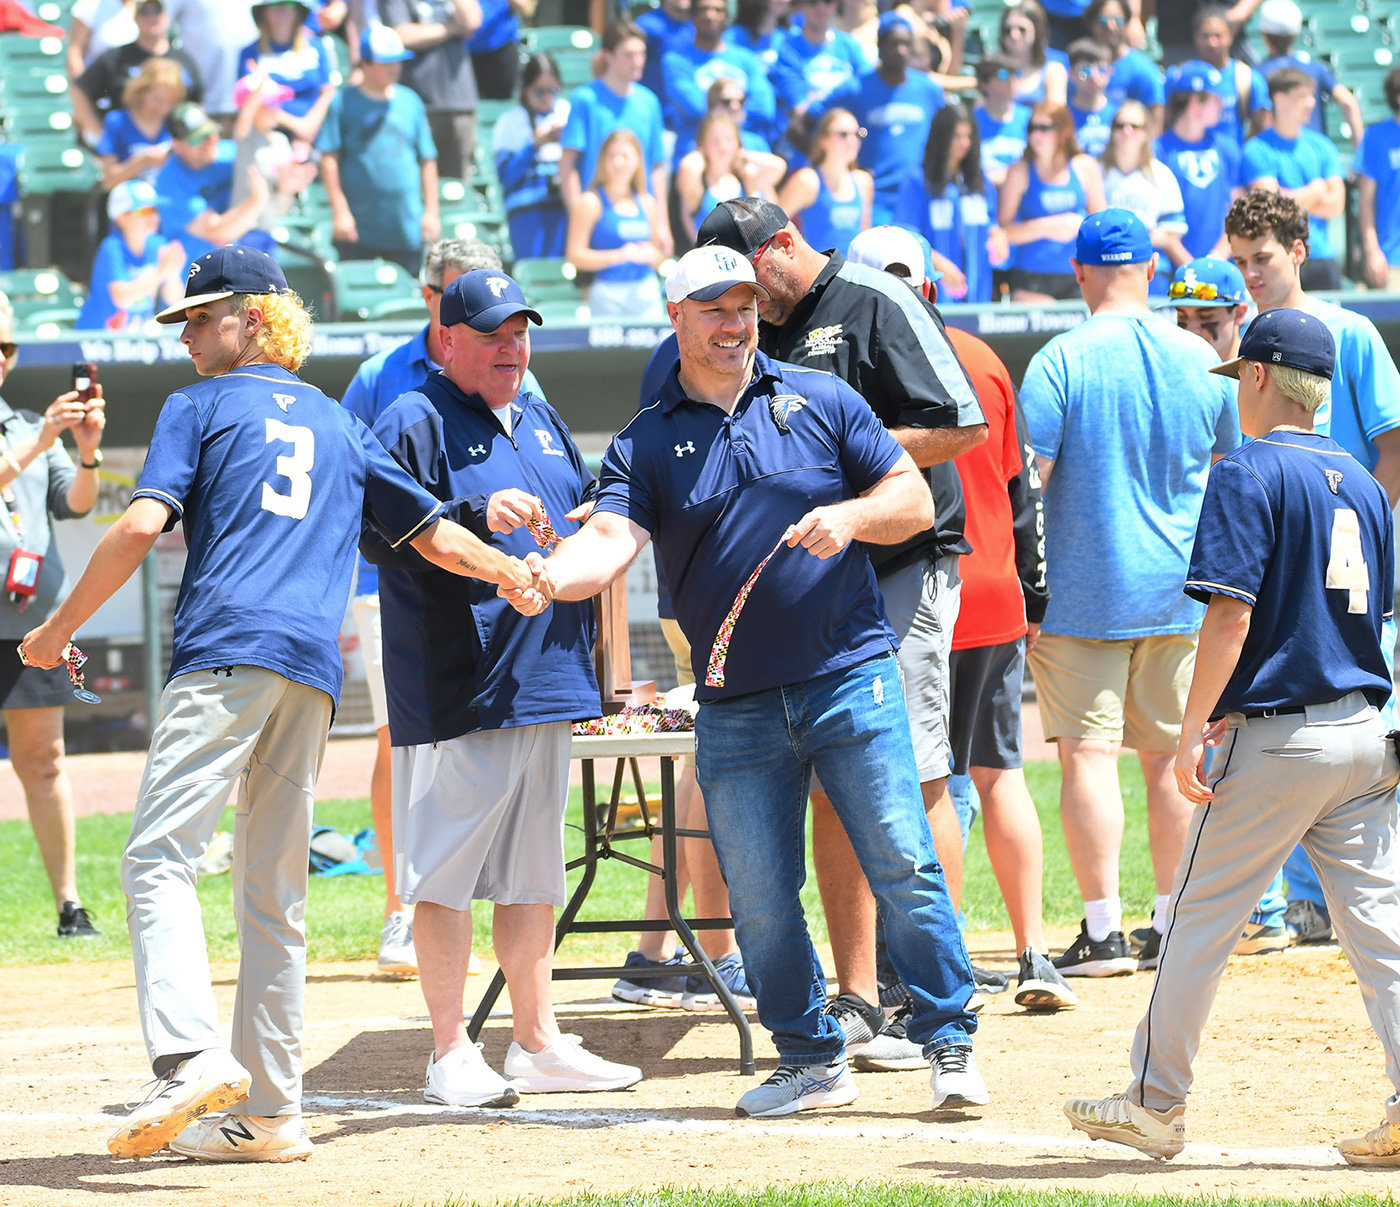 Retiring Severna Park High School Principal Patrick Bathras (center, right) often attended sporting events, like the 2022 baseball state championship game in Waldorf, to support his school’s athletes.